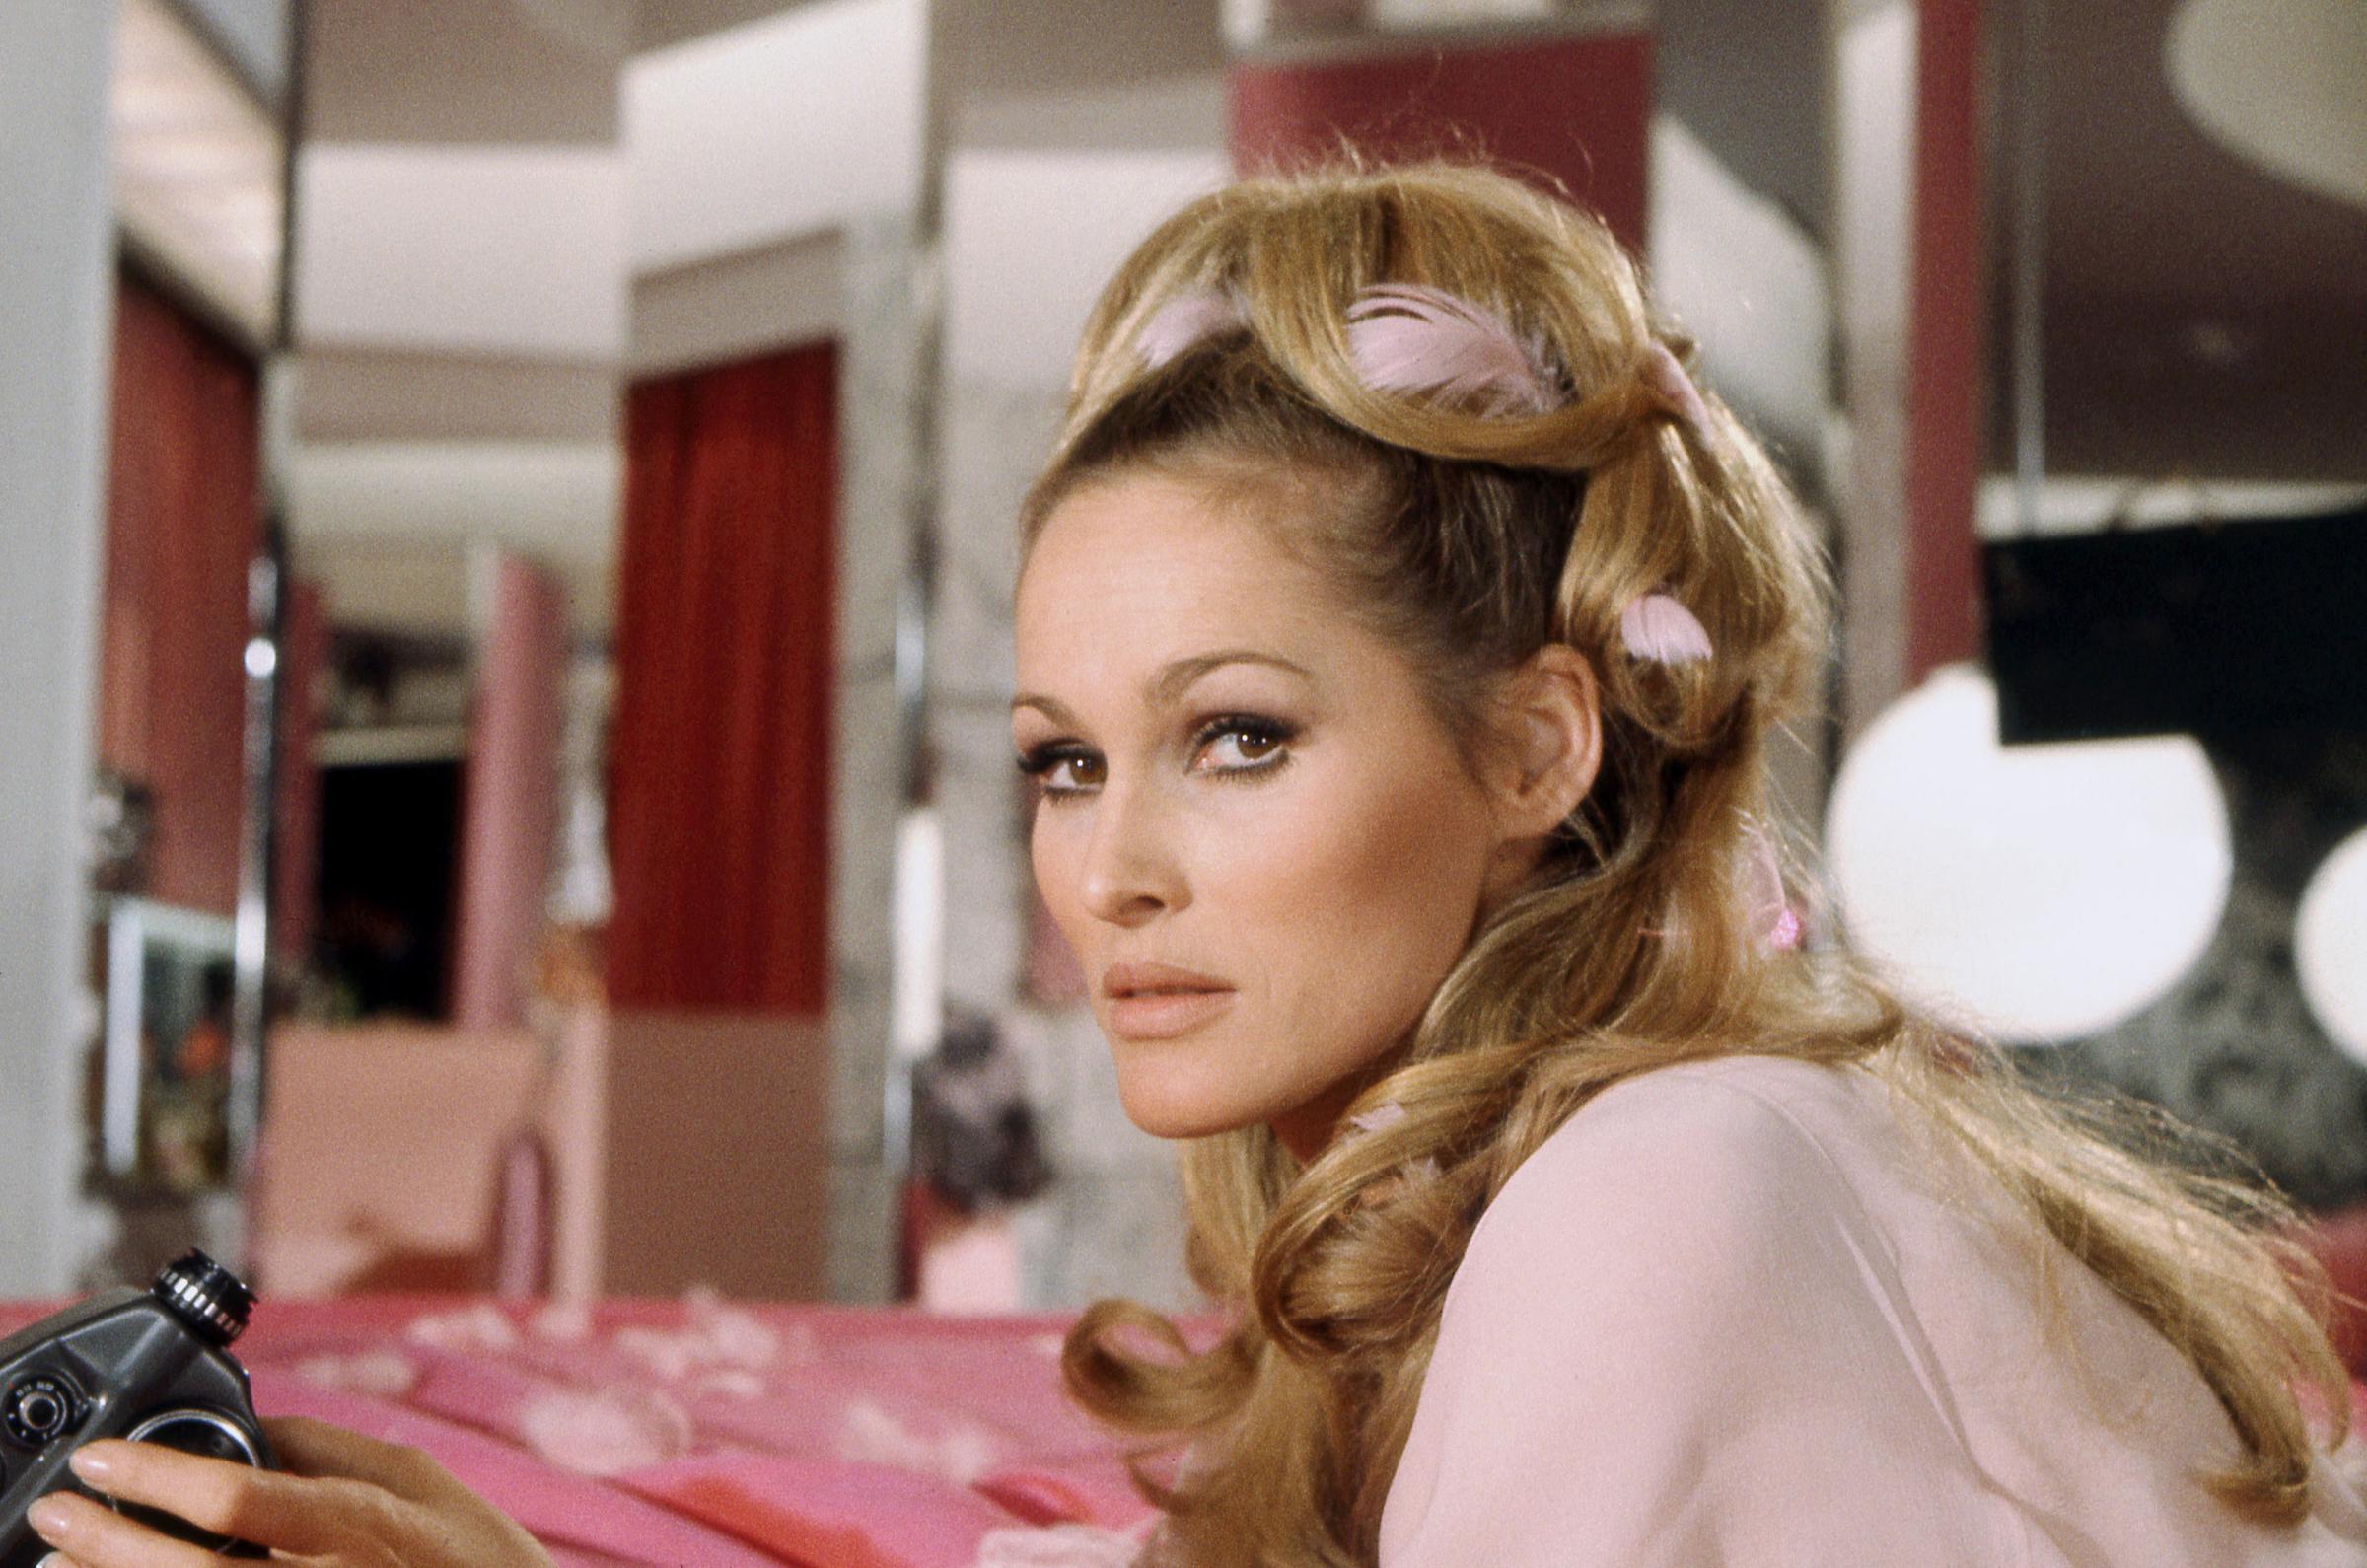 Ursula Andress on the set of Casino Royale in the 1900s. | Source: Getty Images